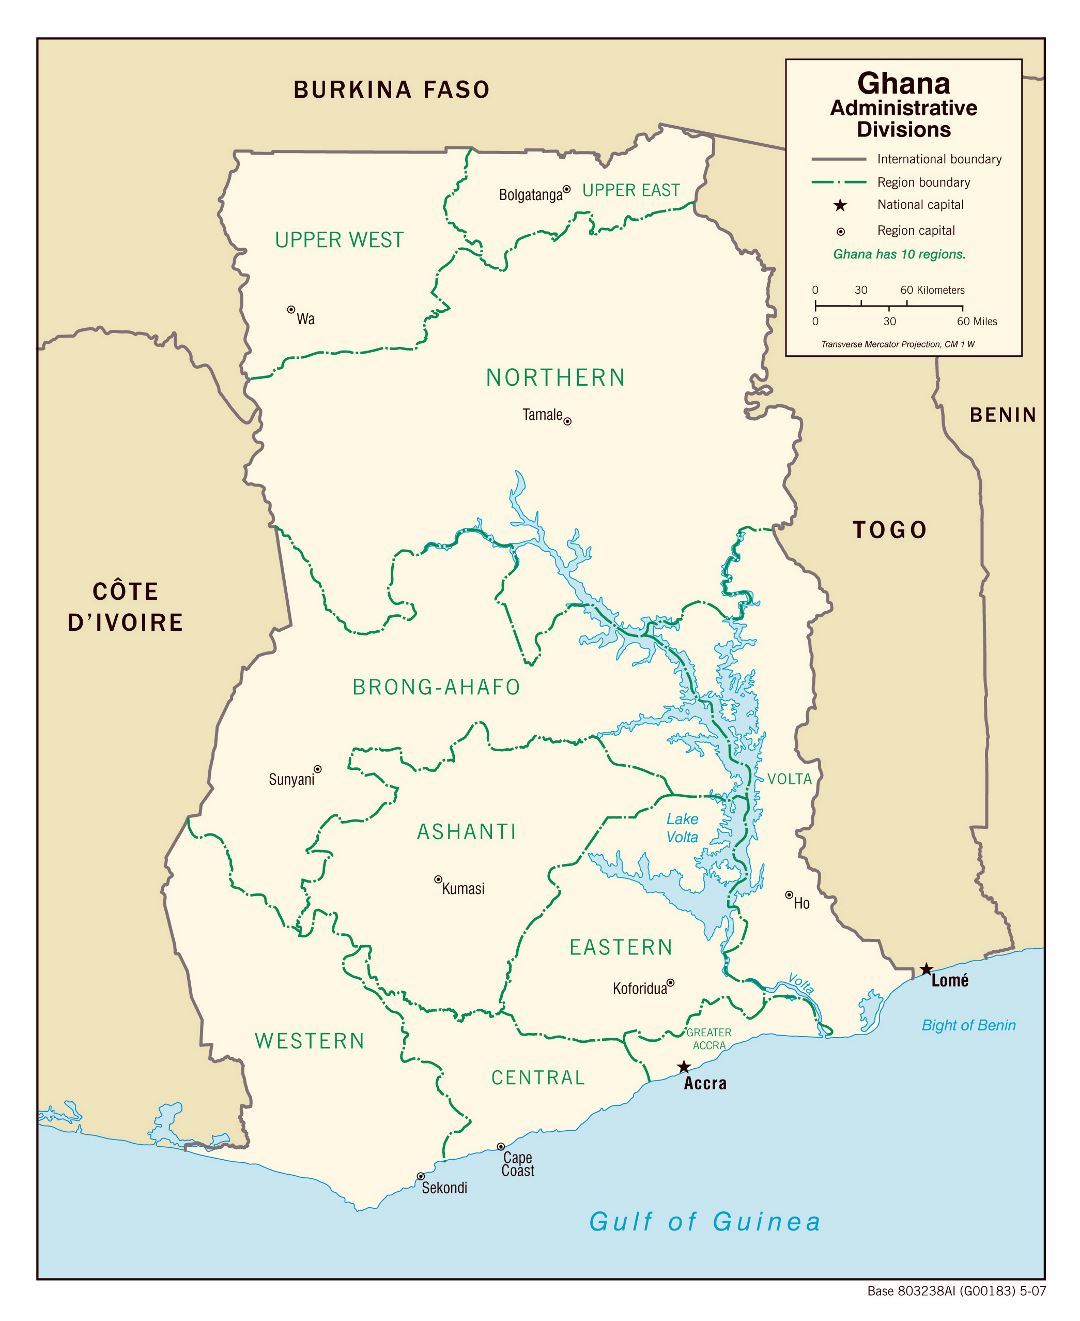 Large administrative divisions map of Ghana - 2007